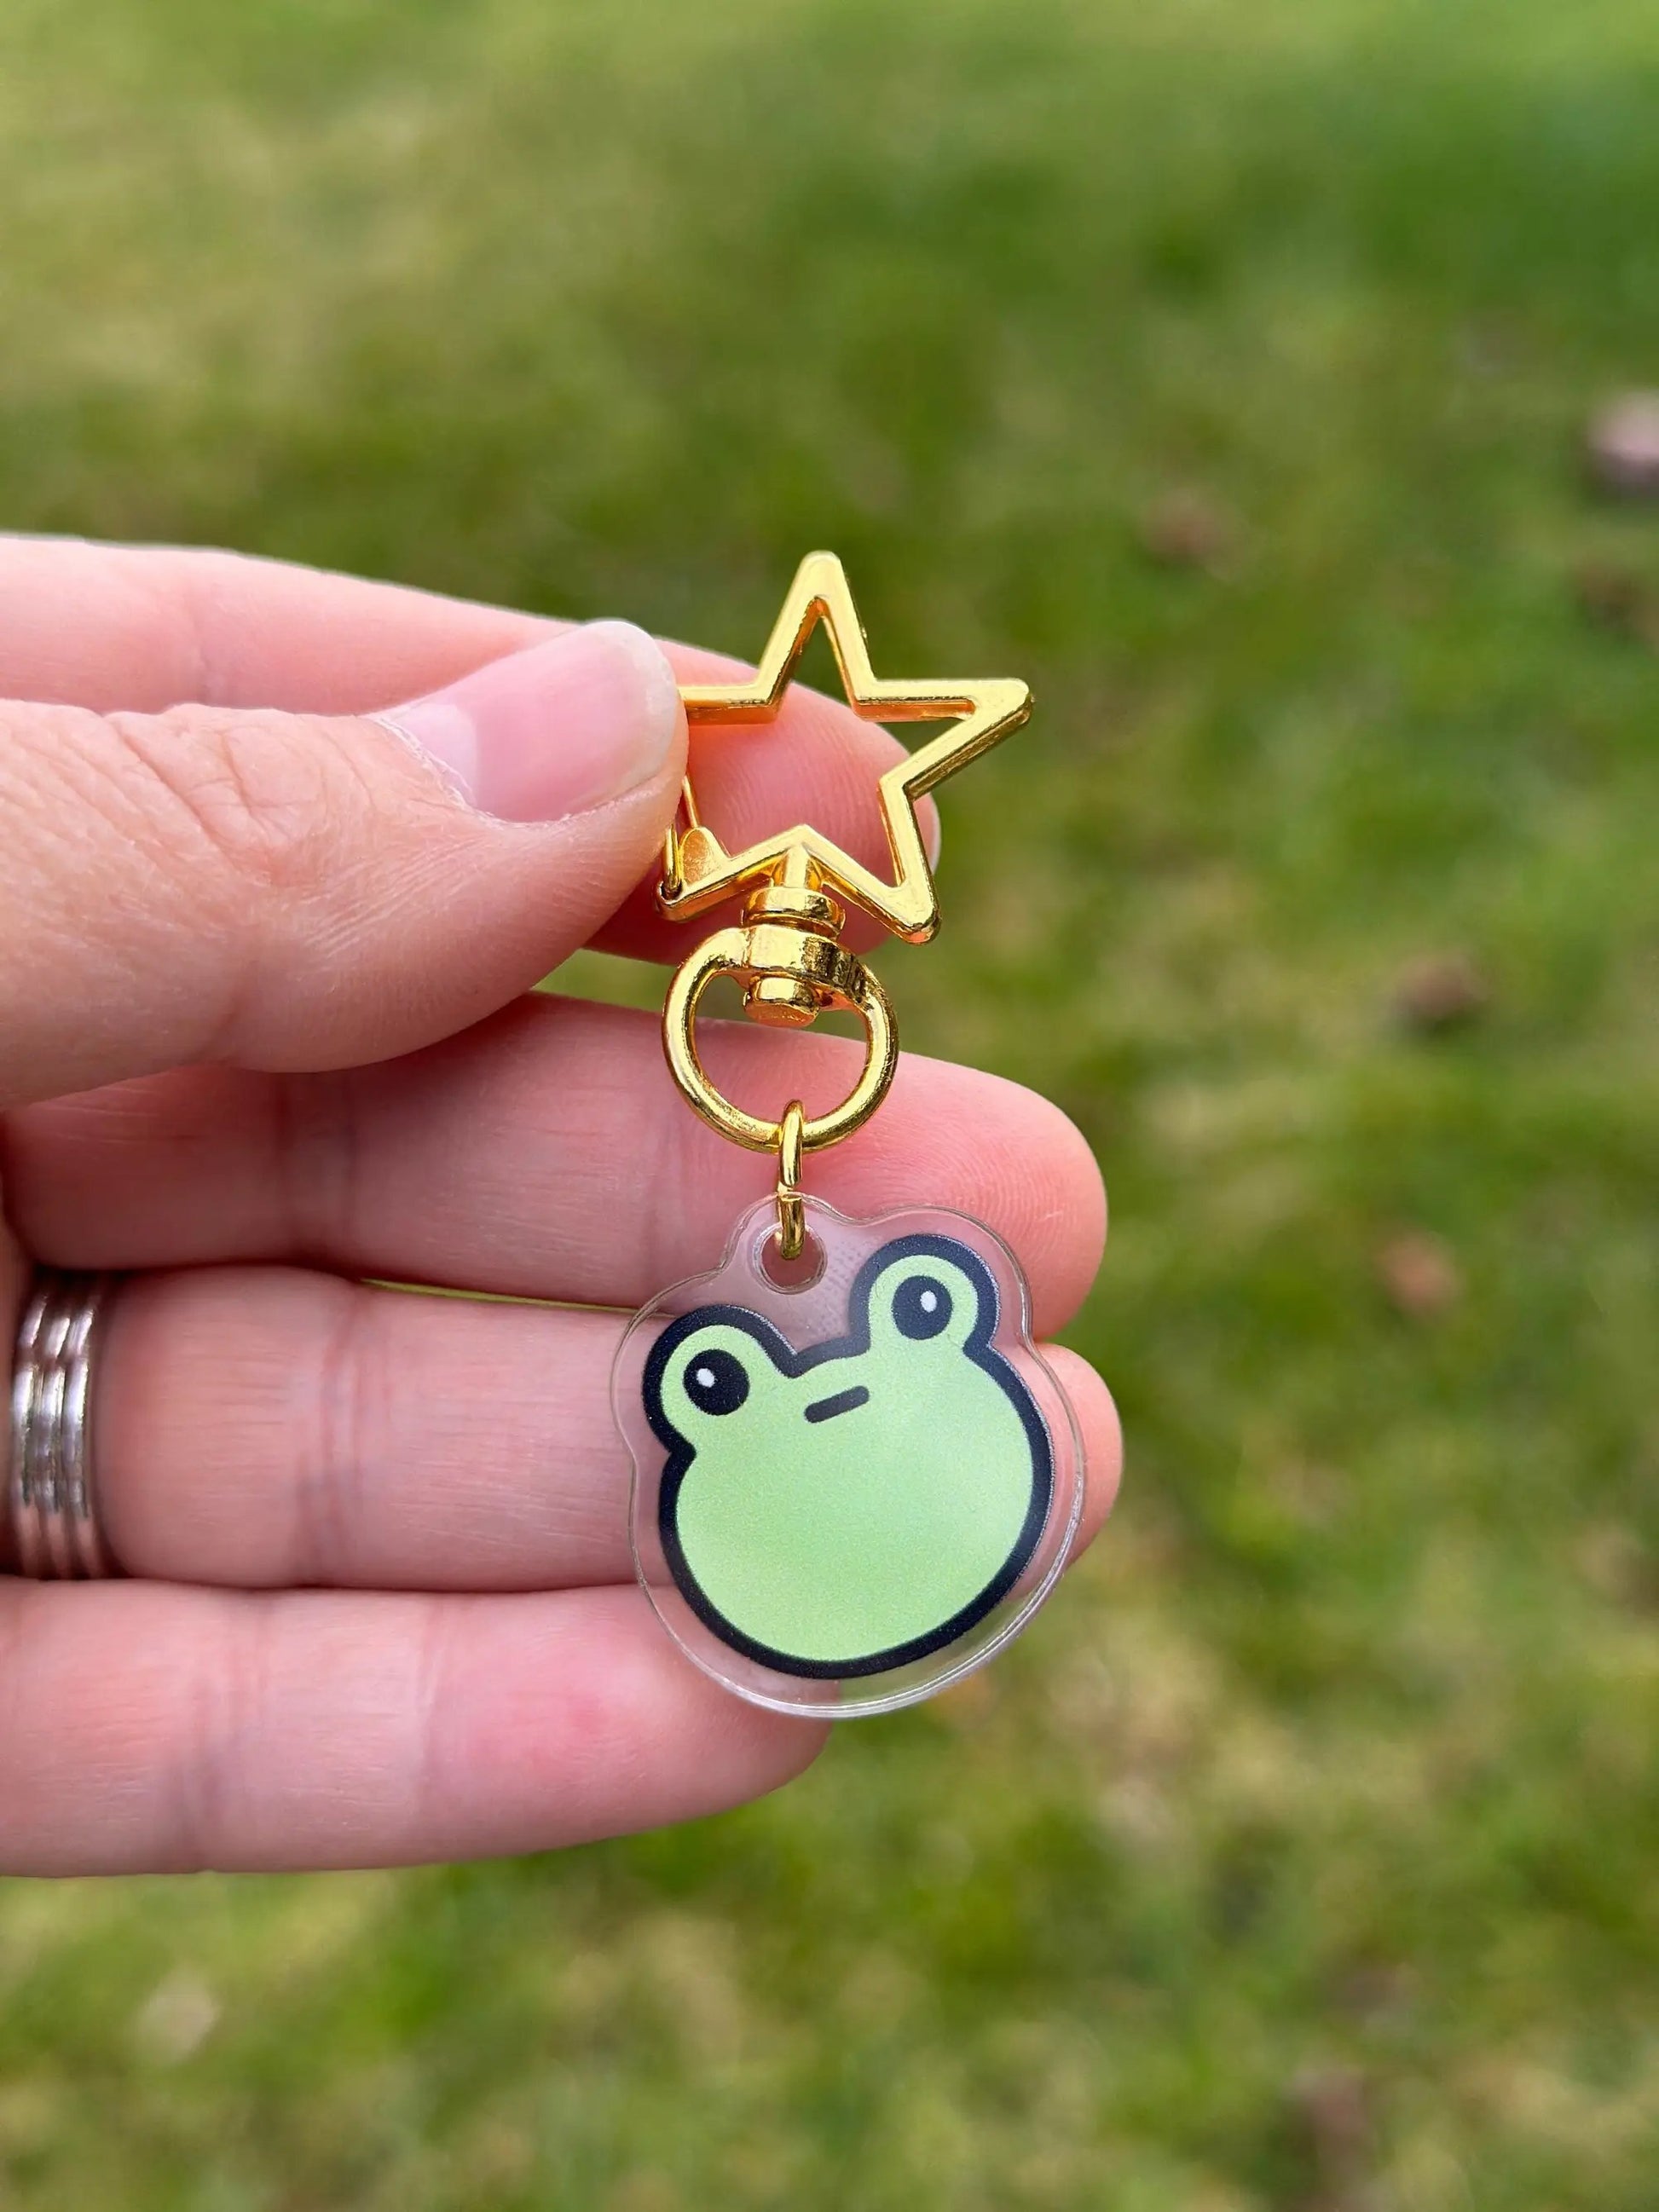 a person holding a key chain with a frog on it